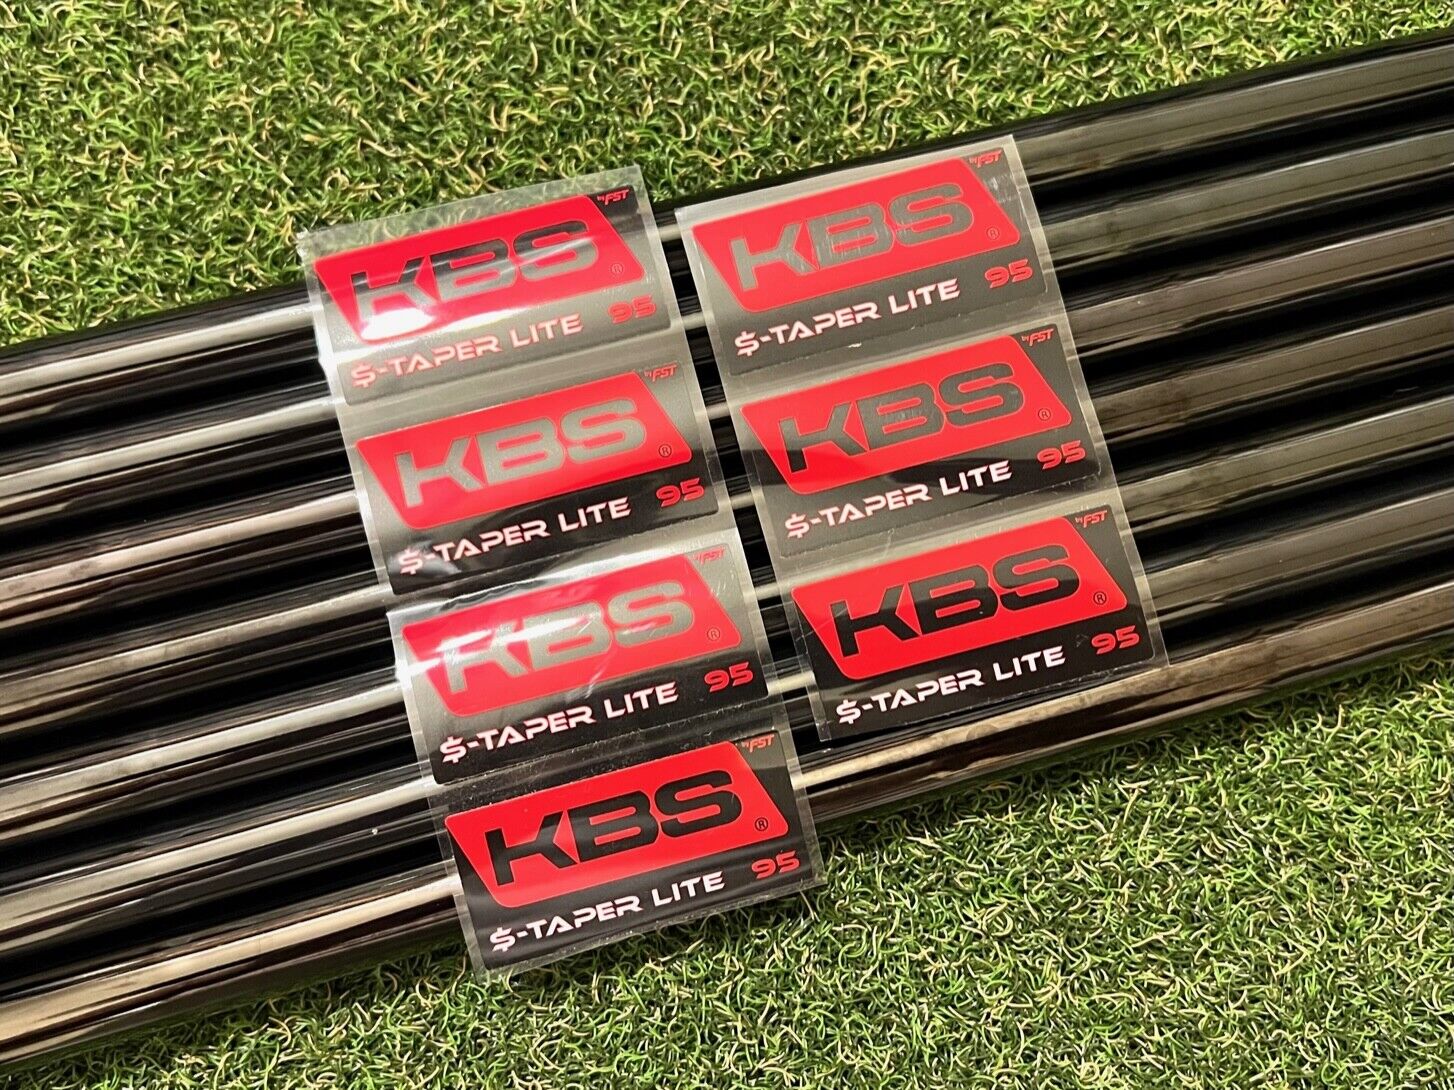 KBS $-Taper Lite Black PVD .370" Parallel Iron Shaft - The Golf Club Trader